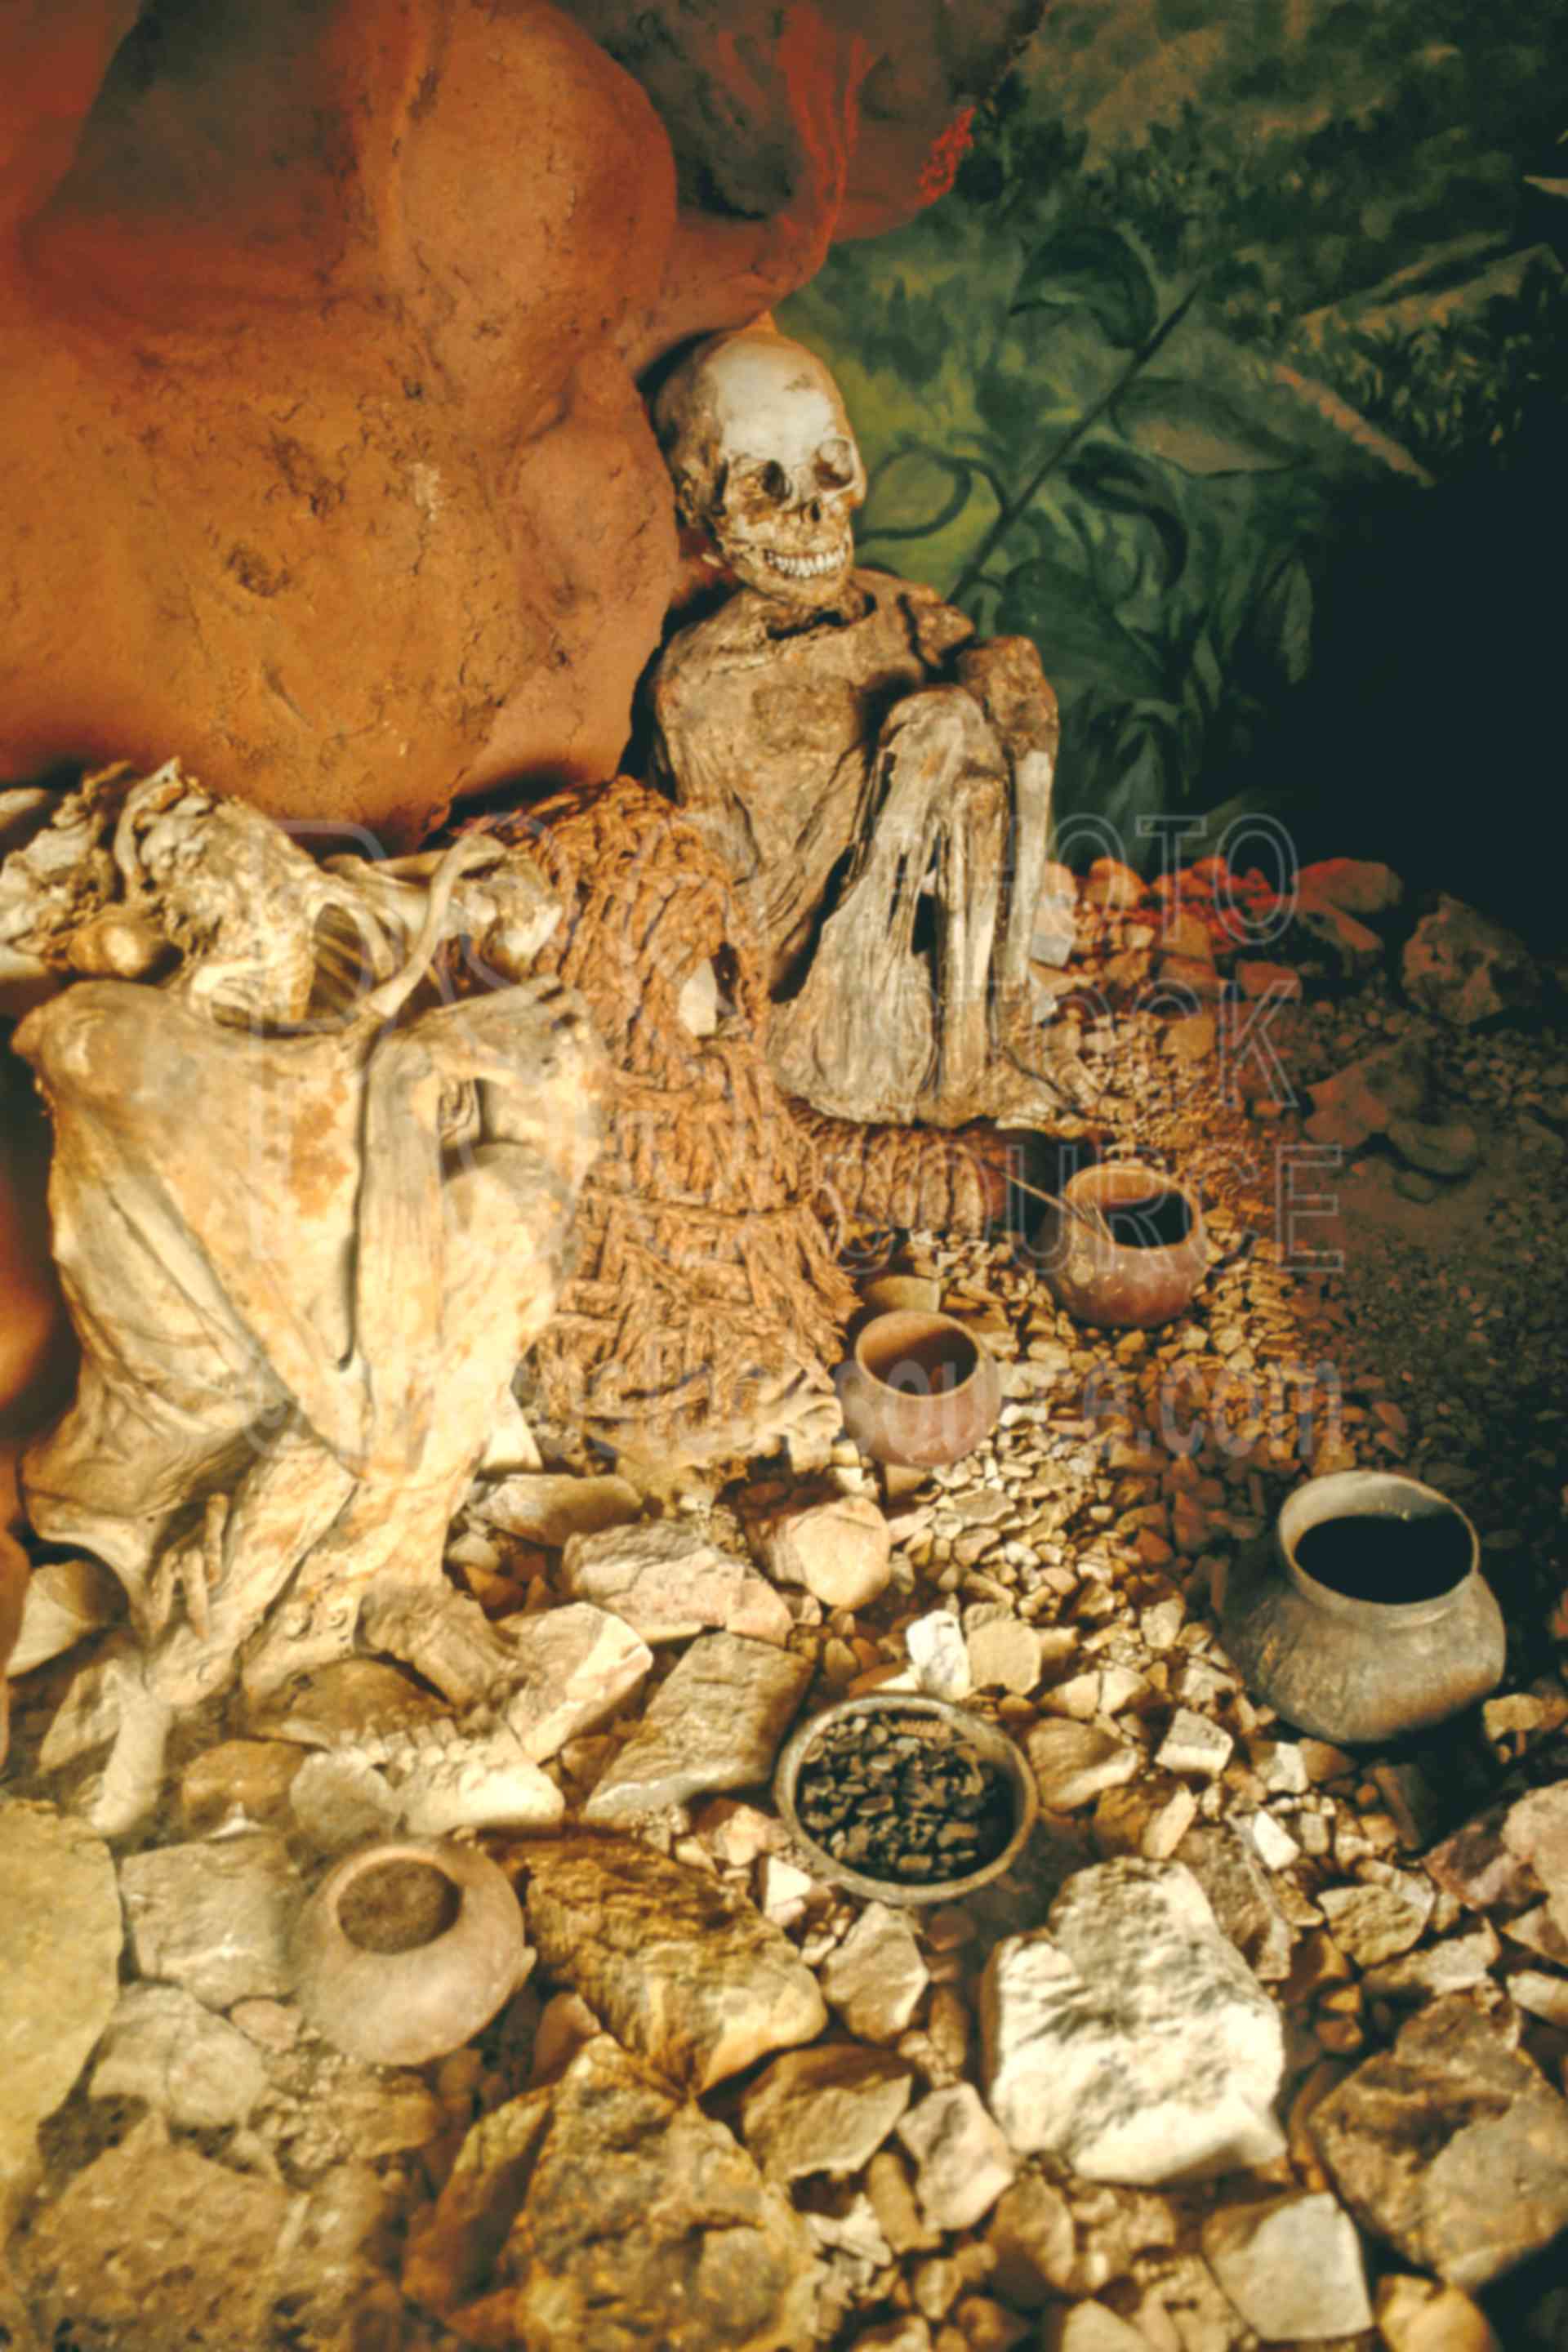 Ancient Burial,bone,burial,death,archaeology,museums